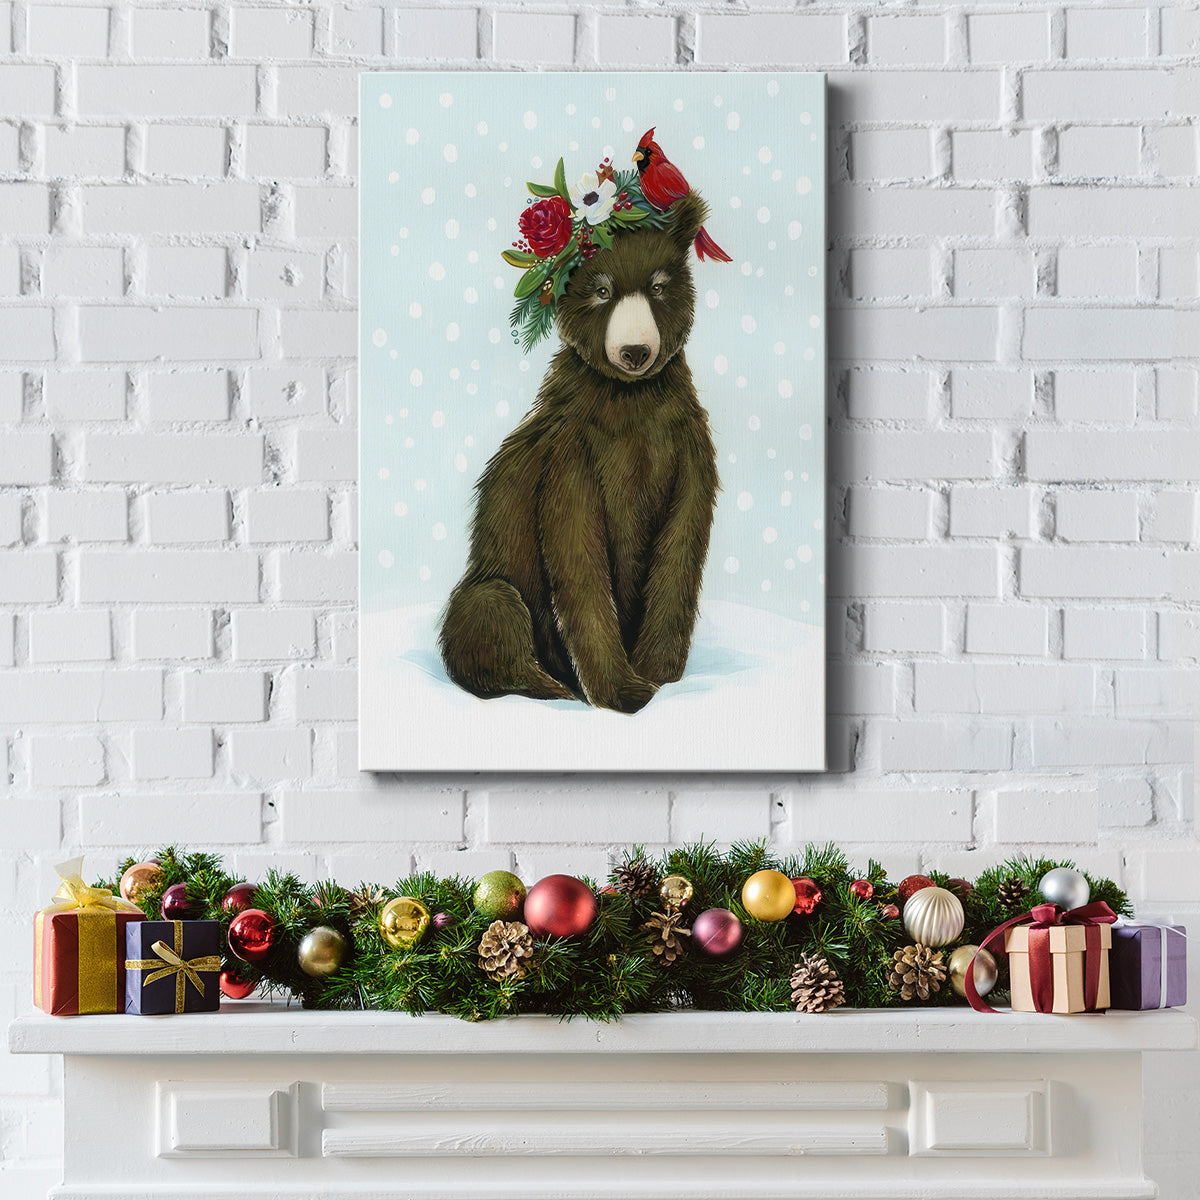 Winter Woodland Creatures with Cardinals I - Gallery Wrapped Canvas